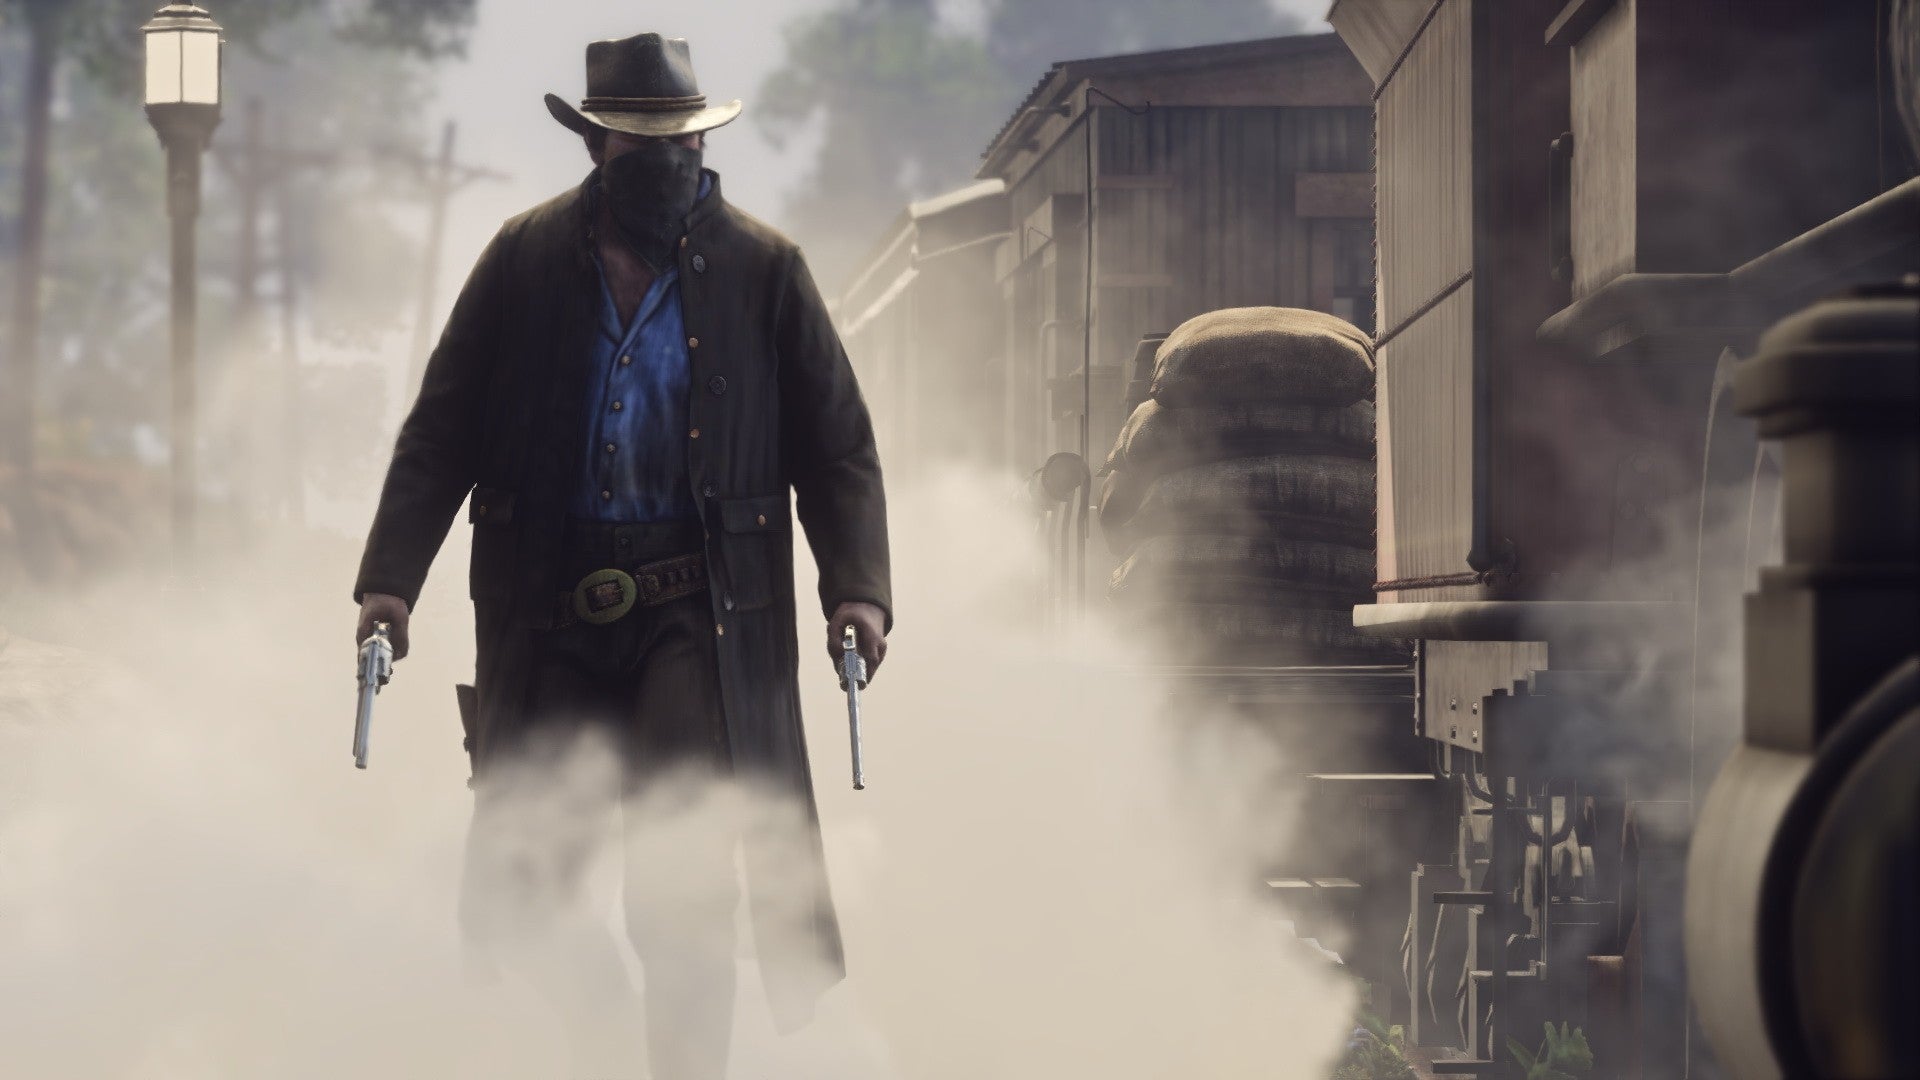 Red Dead Redemption 2 image showing Arthur Morgan wearing a bandana walking through some smoke on a street. He is dual-wielding revolvers.